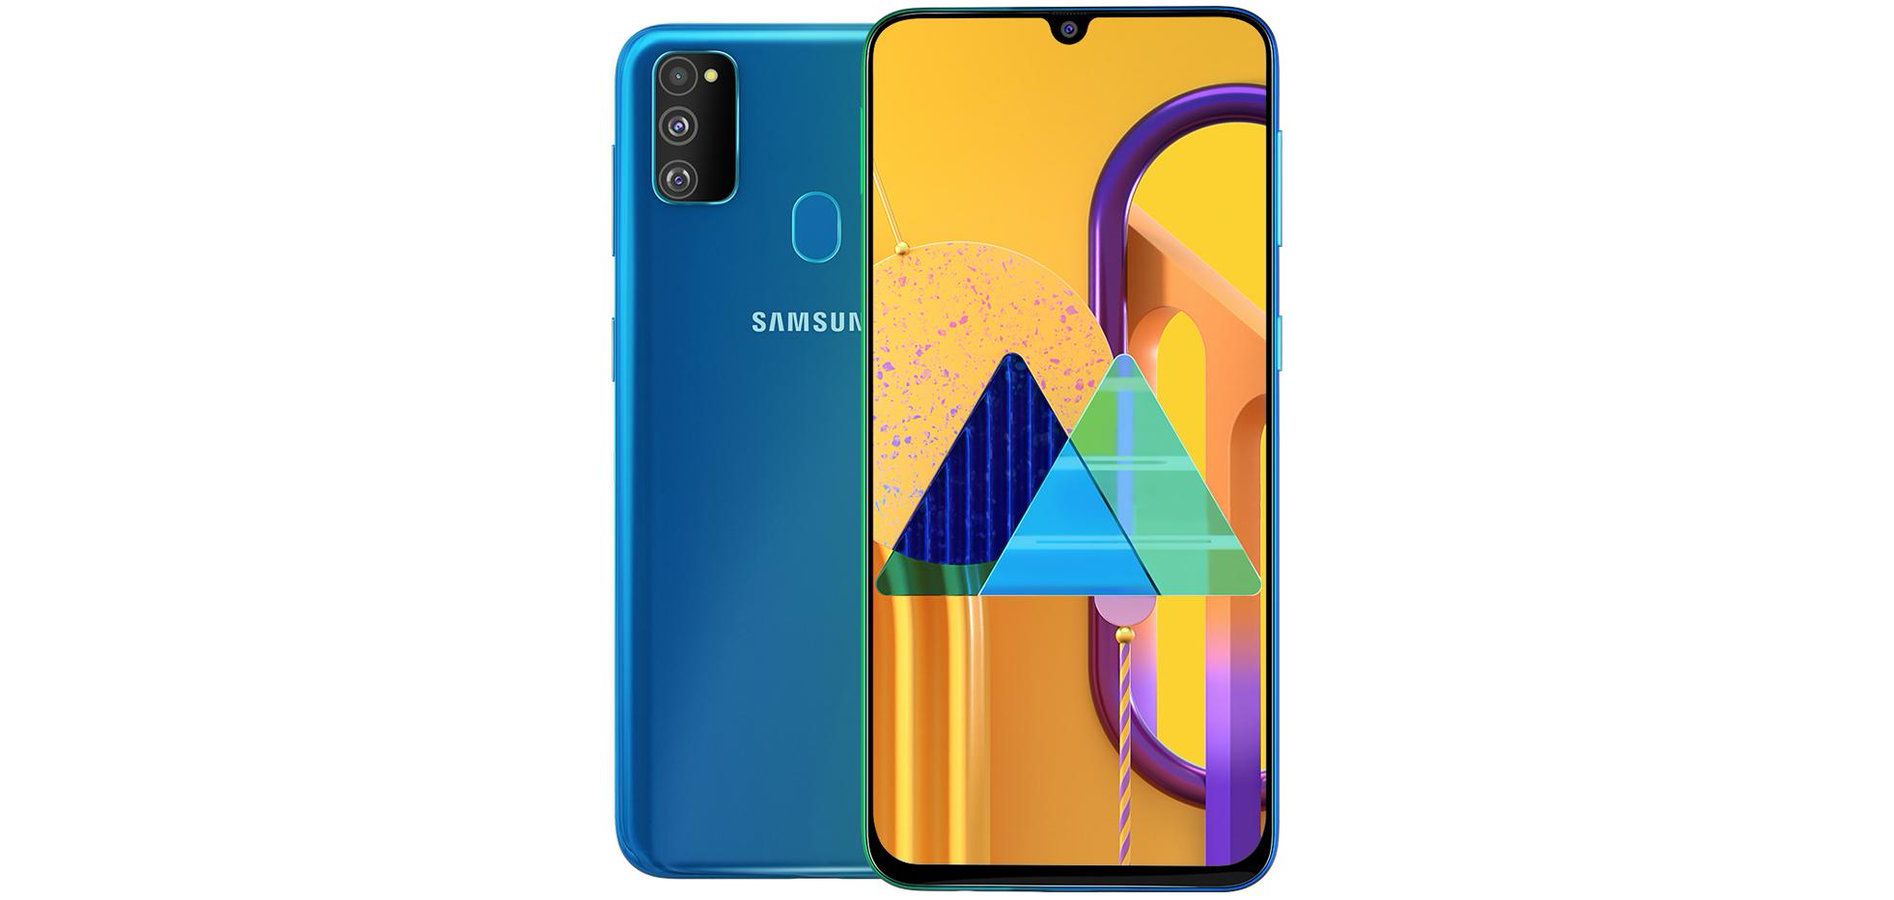 Samsung Galaxy M30s starts receiving Android 11-based One UI 3.0 update